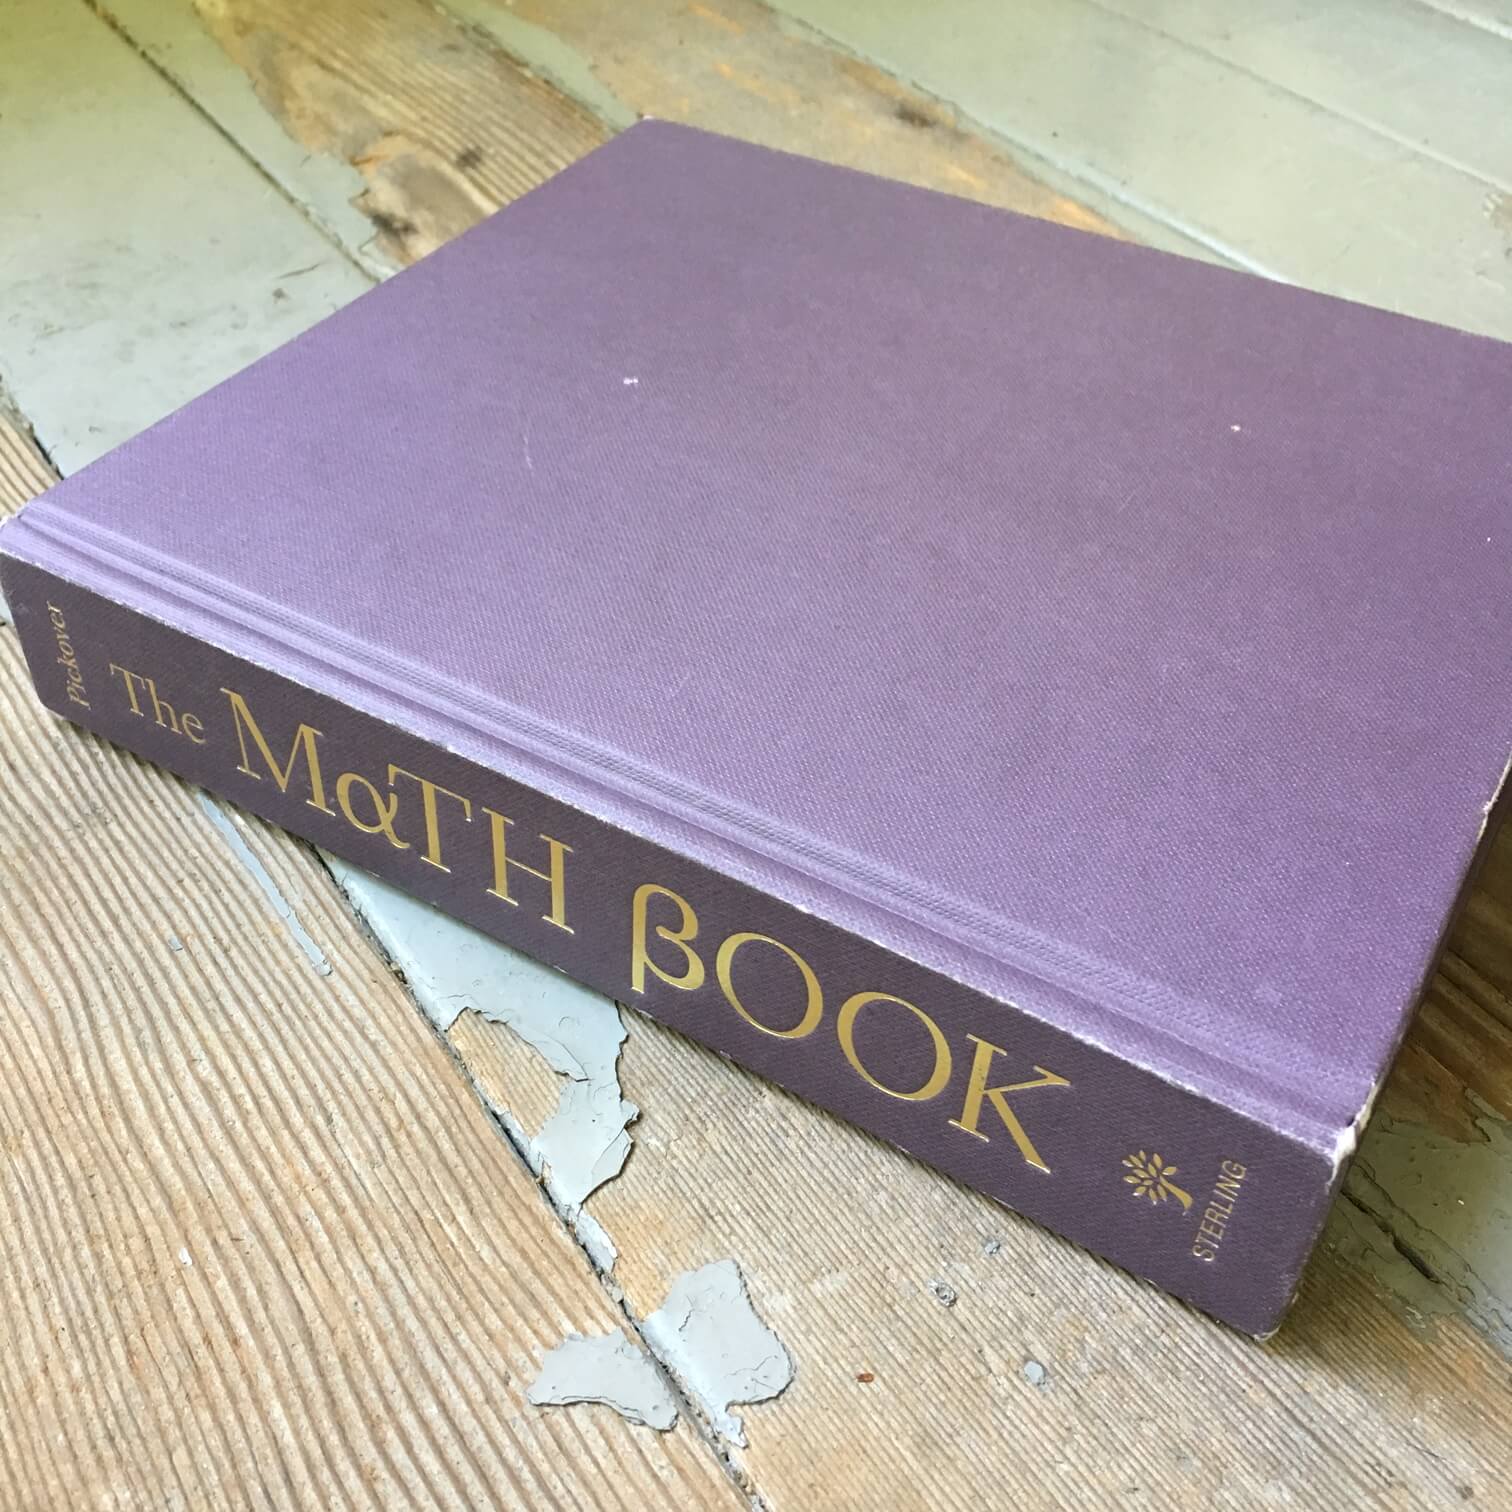 Scaffolded Math and Science: A Growing List of Favorite Math Books for